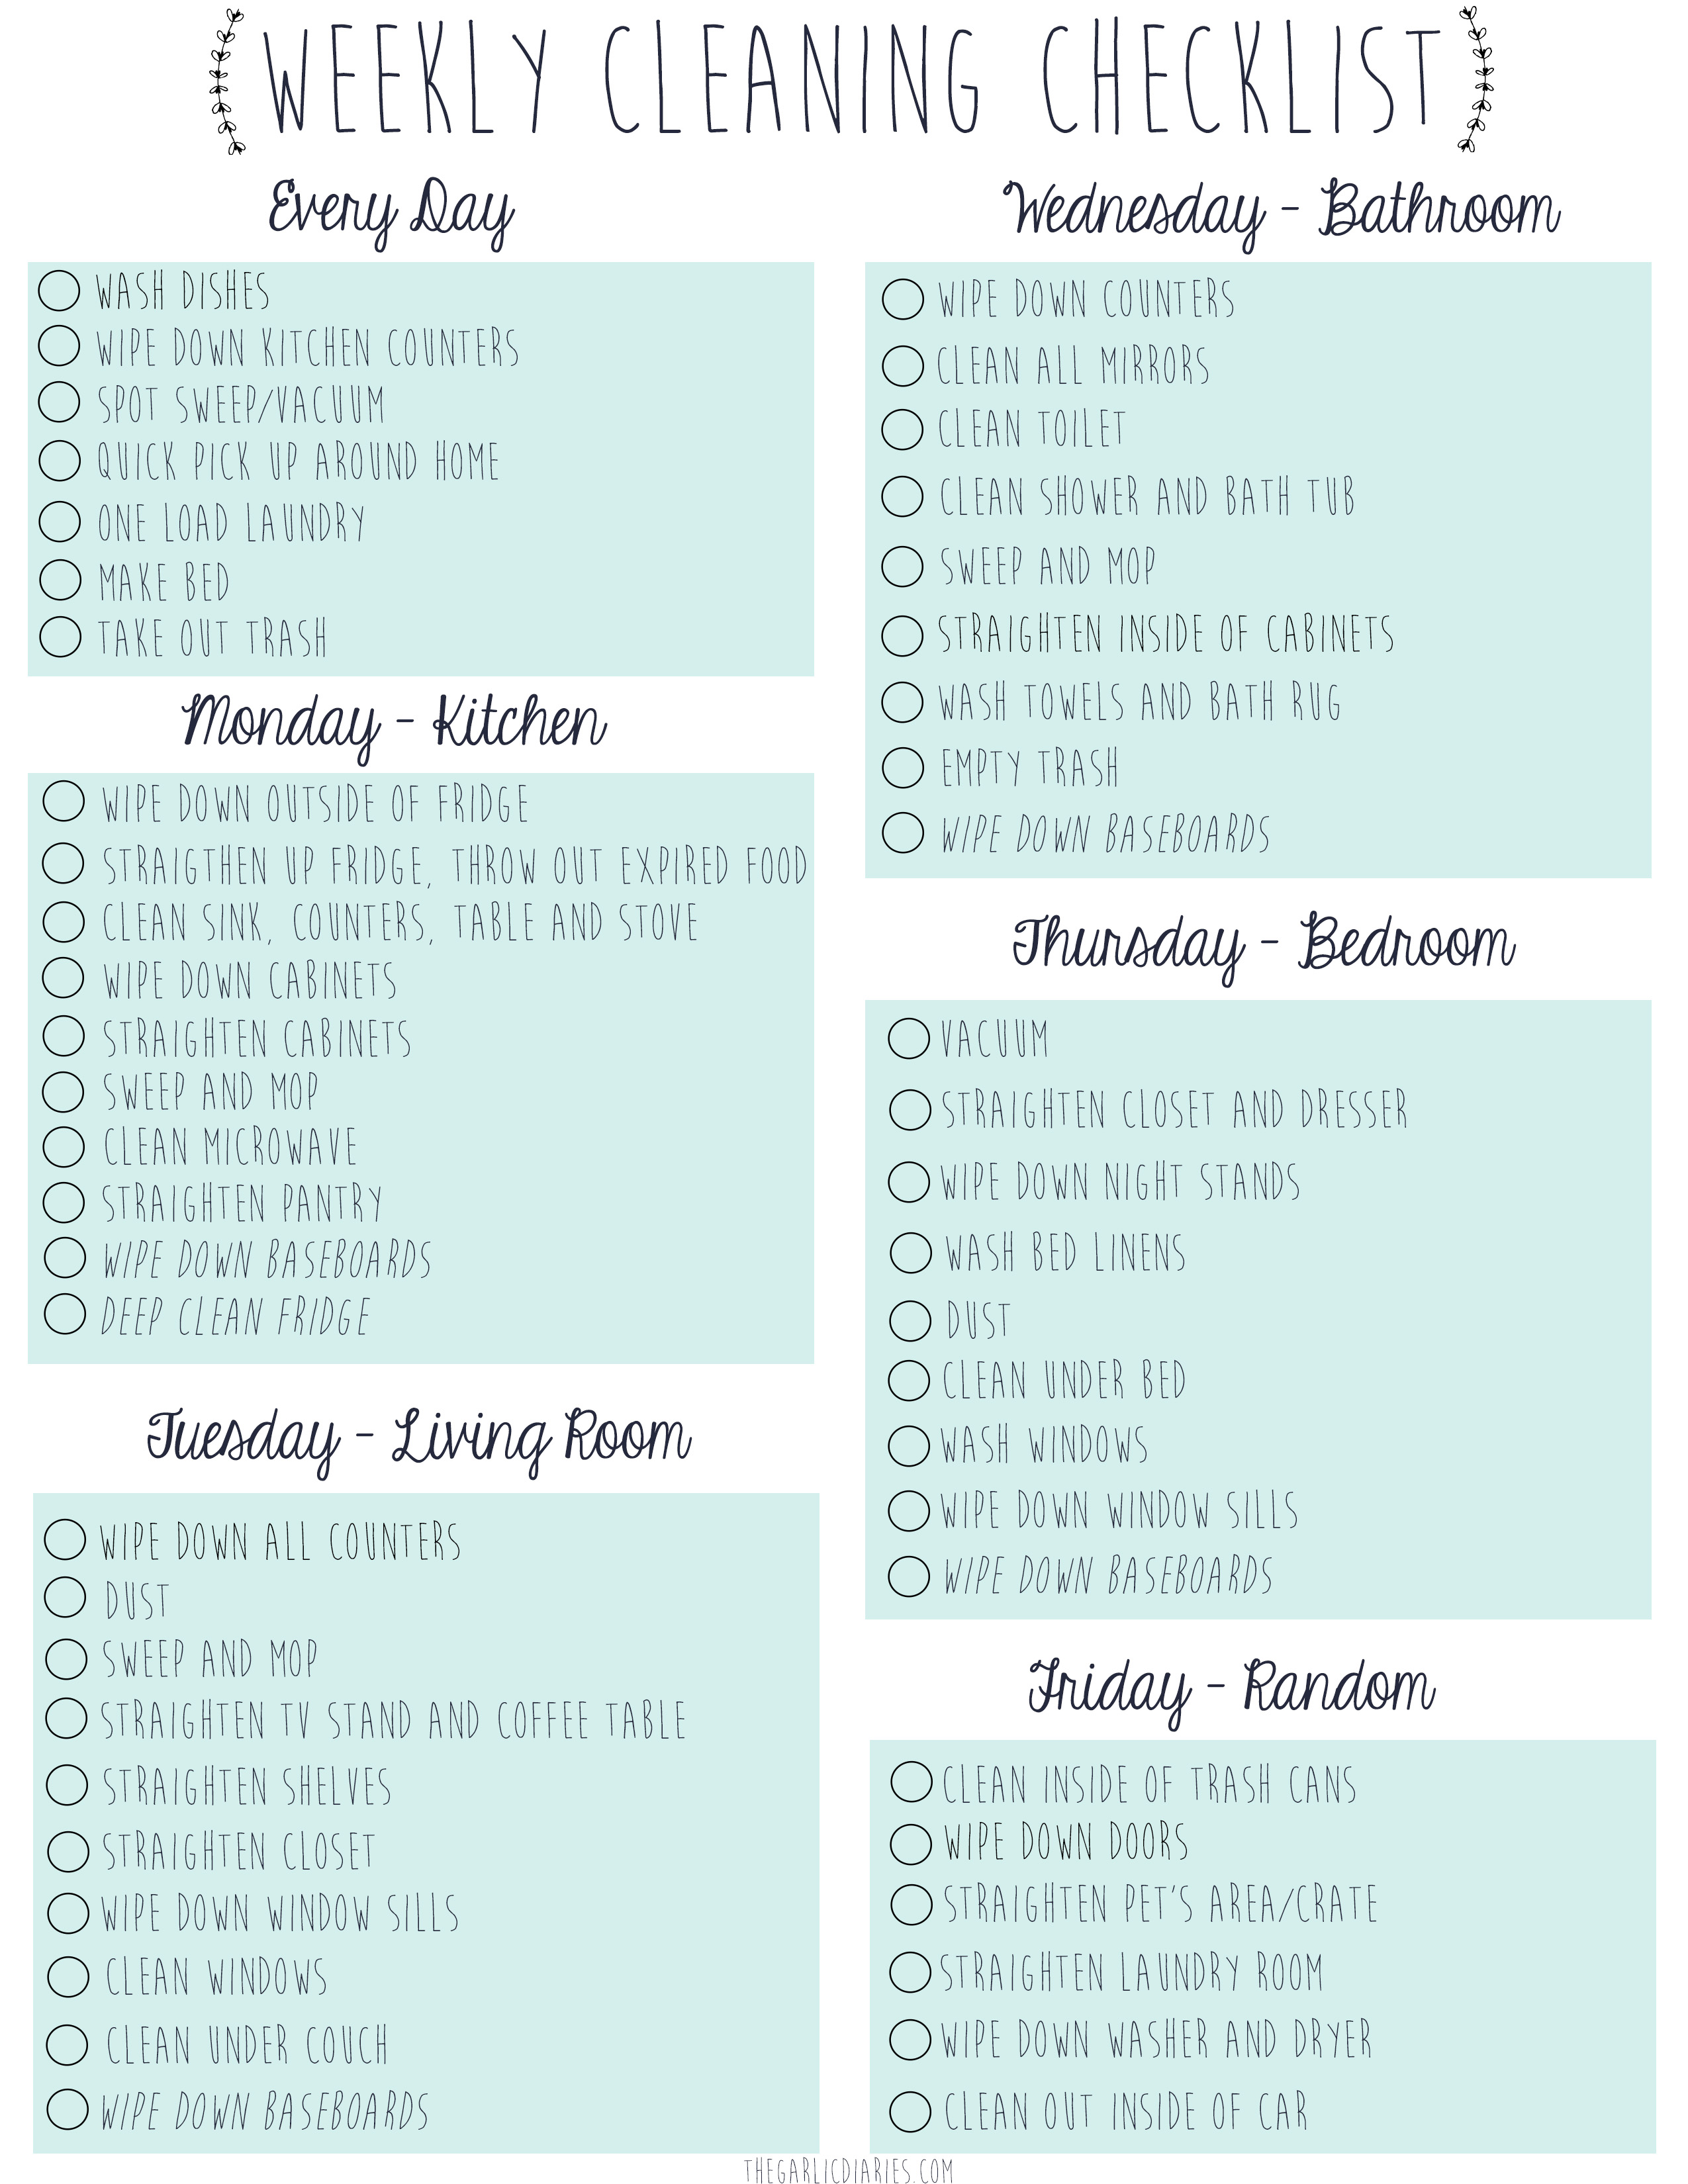 weekly-cleaning-checklist-with-free-downloadable